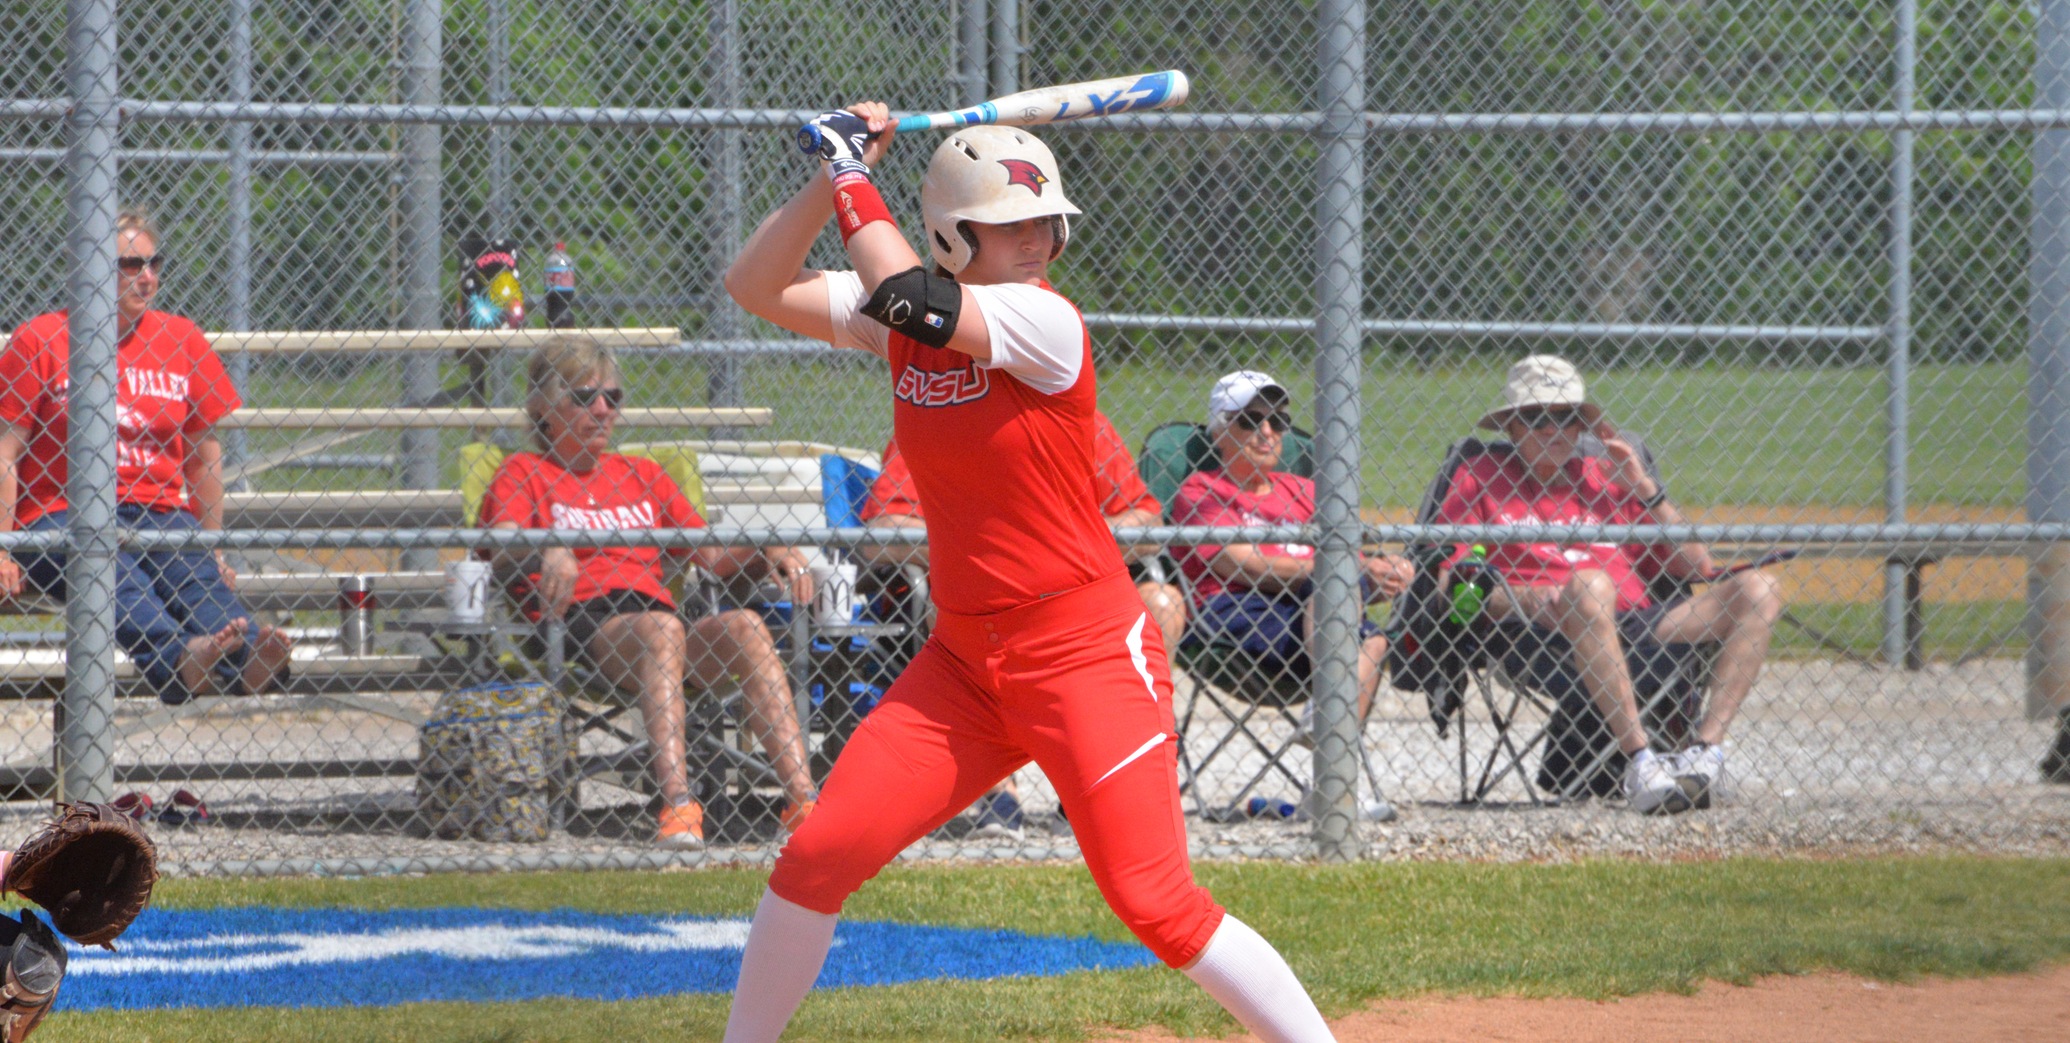 Courtney Reeves drilled a walk-off HR in the 8th inning for the SVSU victory...